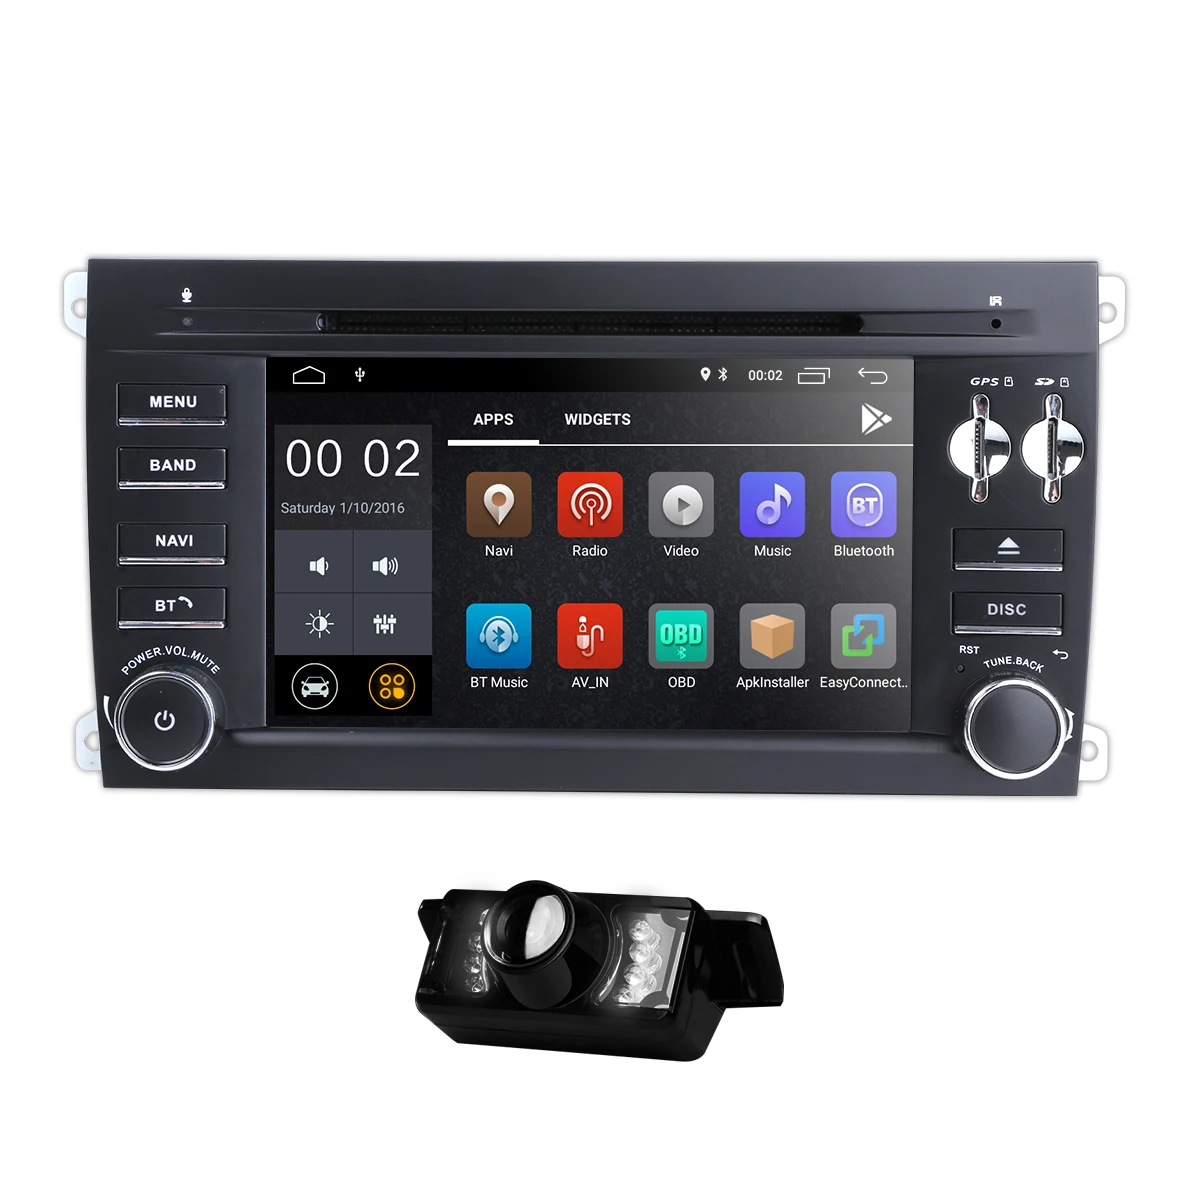 Top Android 8.1 Car DVD Multimedia Player For Porsche Cayenne 2003 2004 2005 2006 2007 2008 2009 2010 DVR TPMS RDS OBD2 Free camera 0